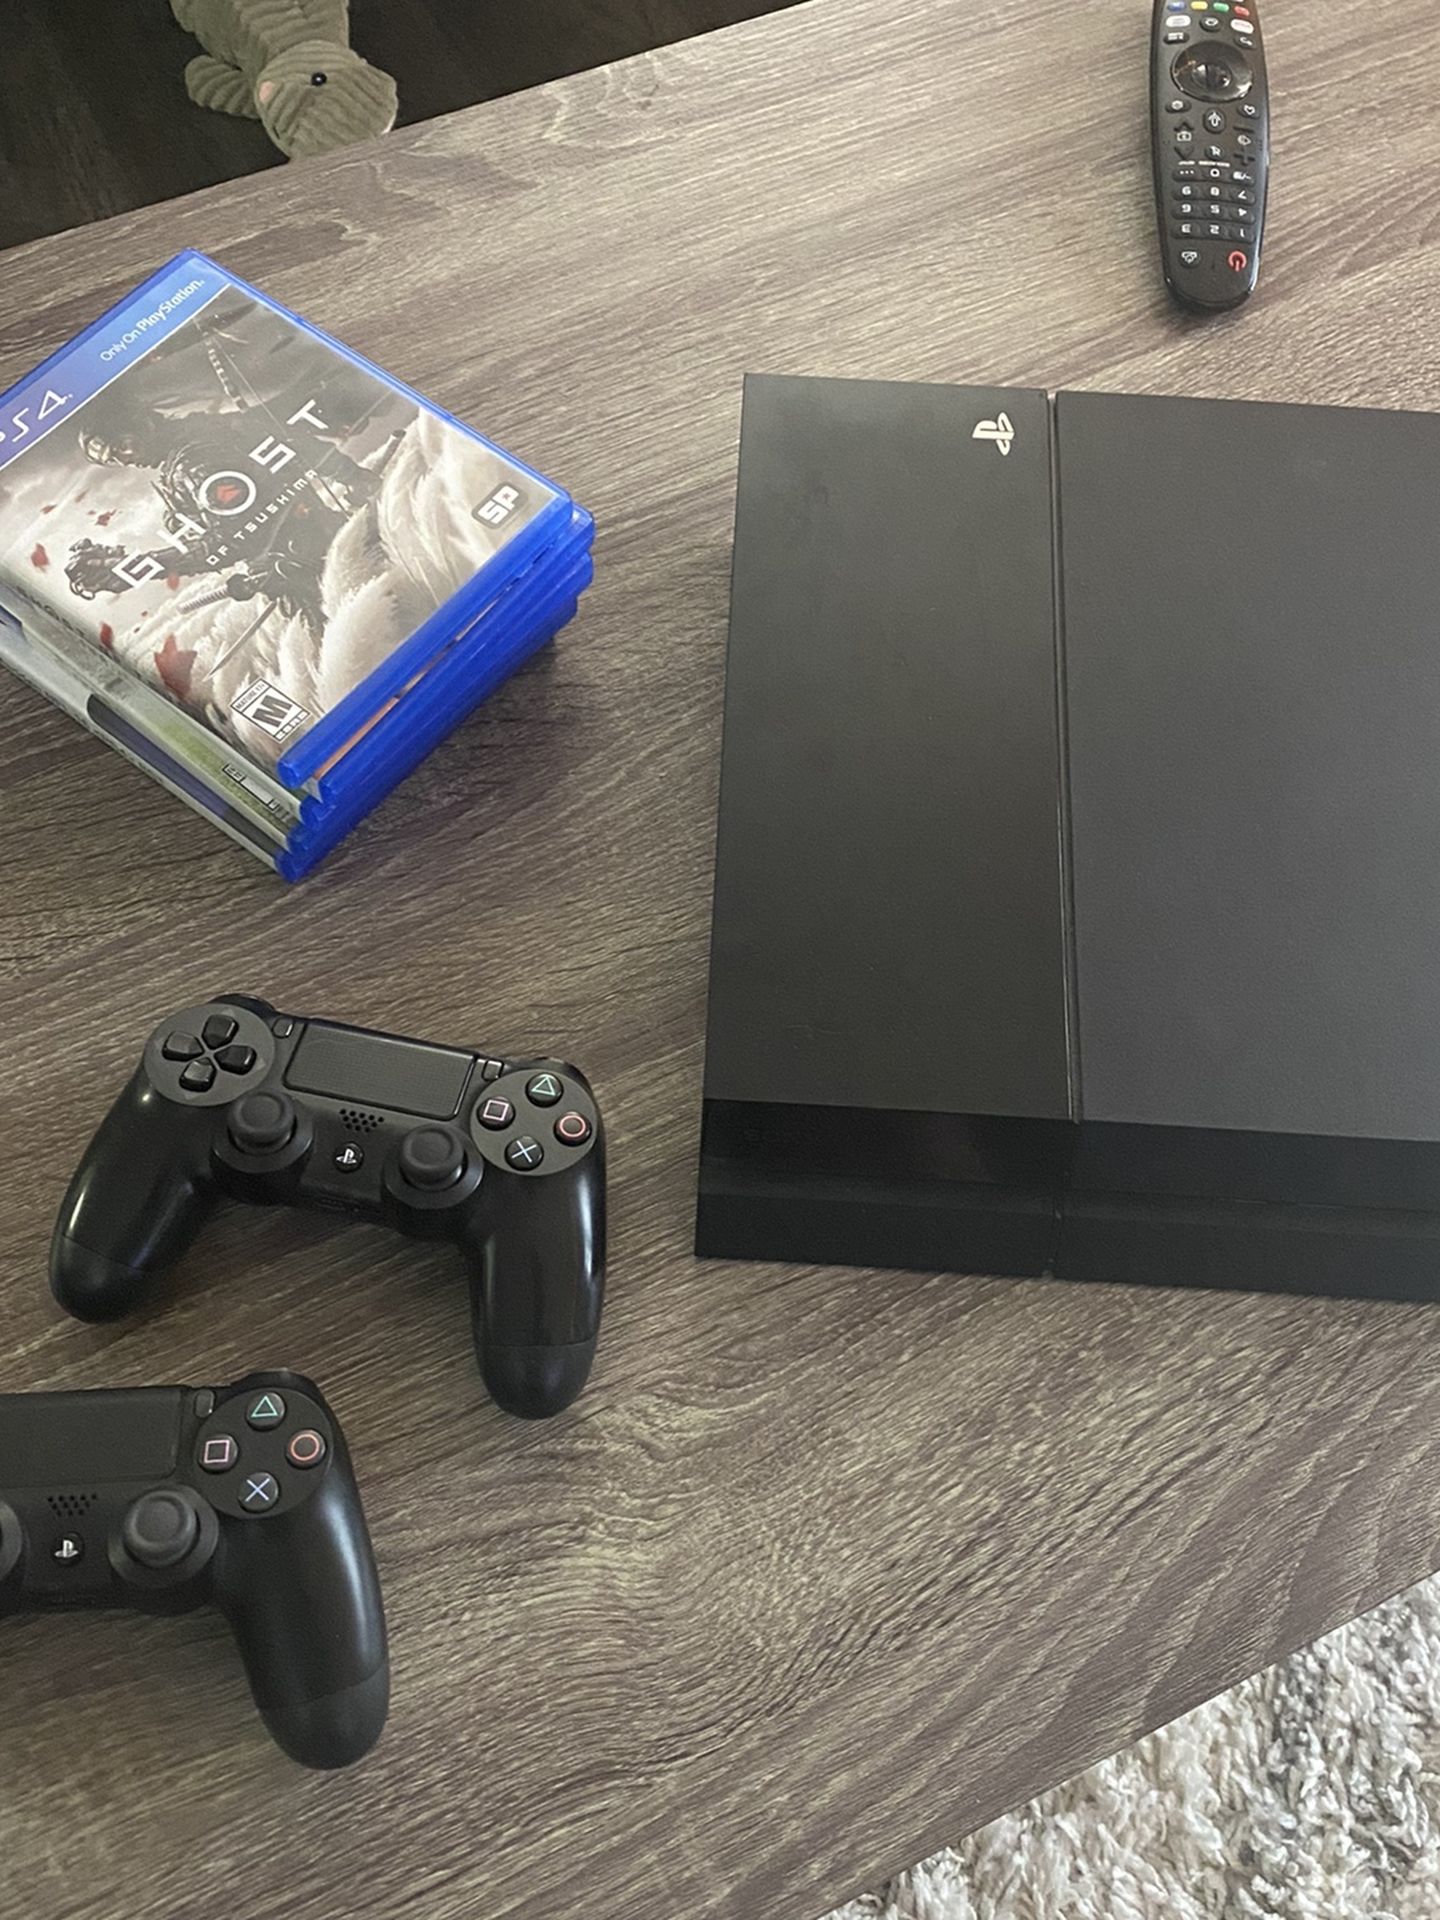 PlayStation 4 With Games And Accessories